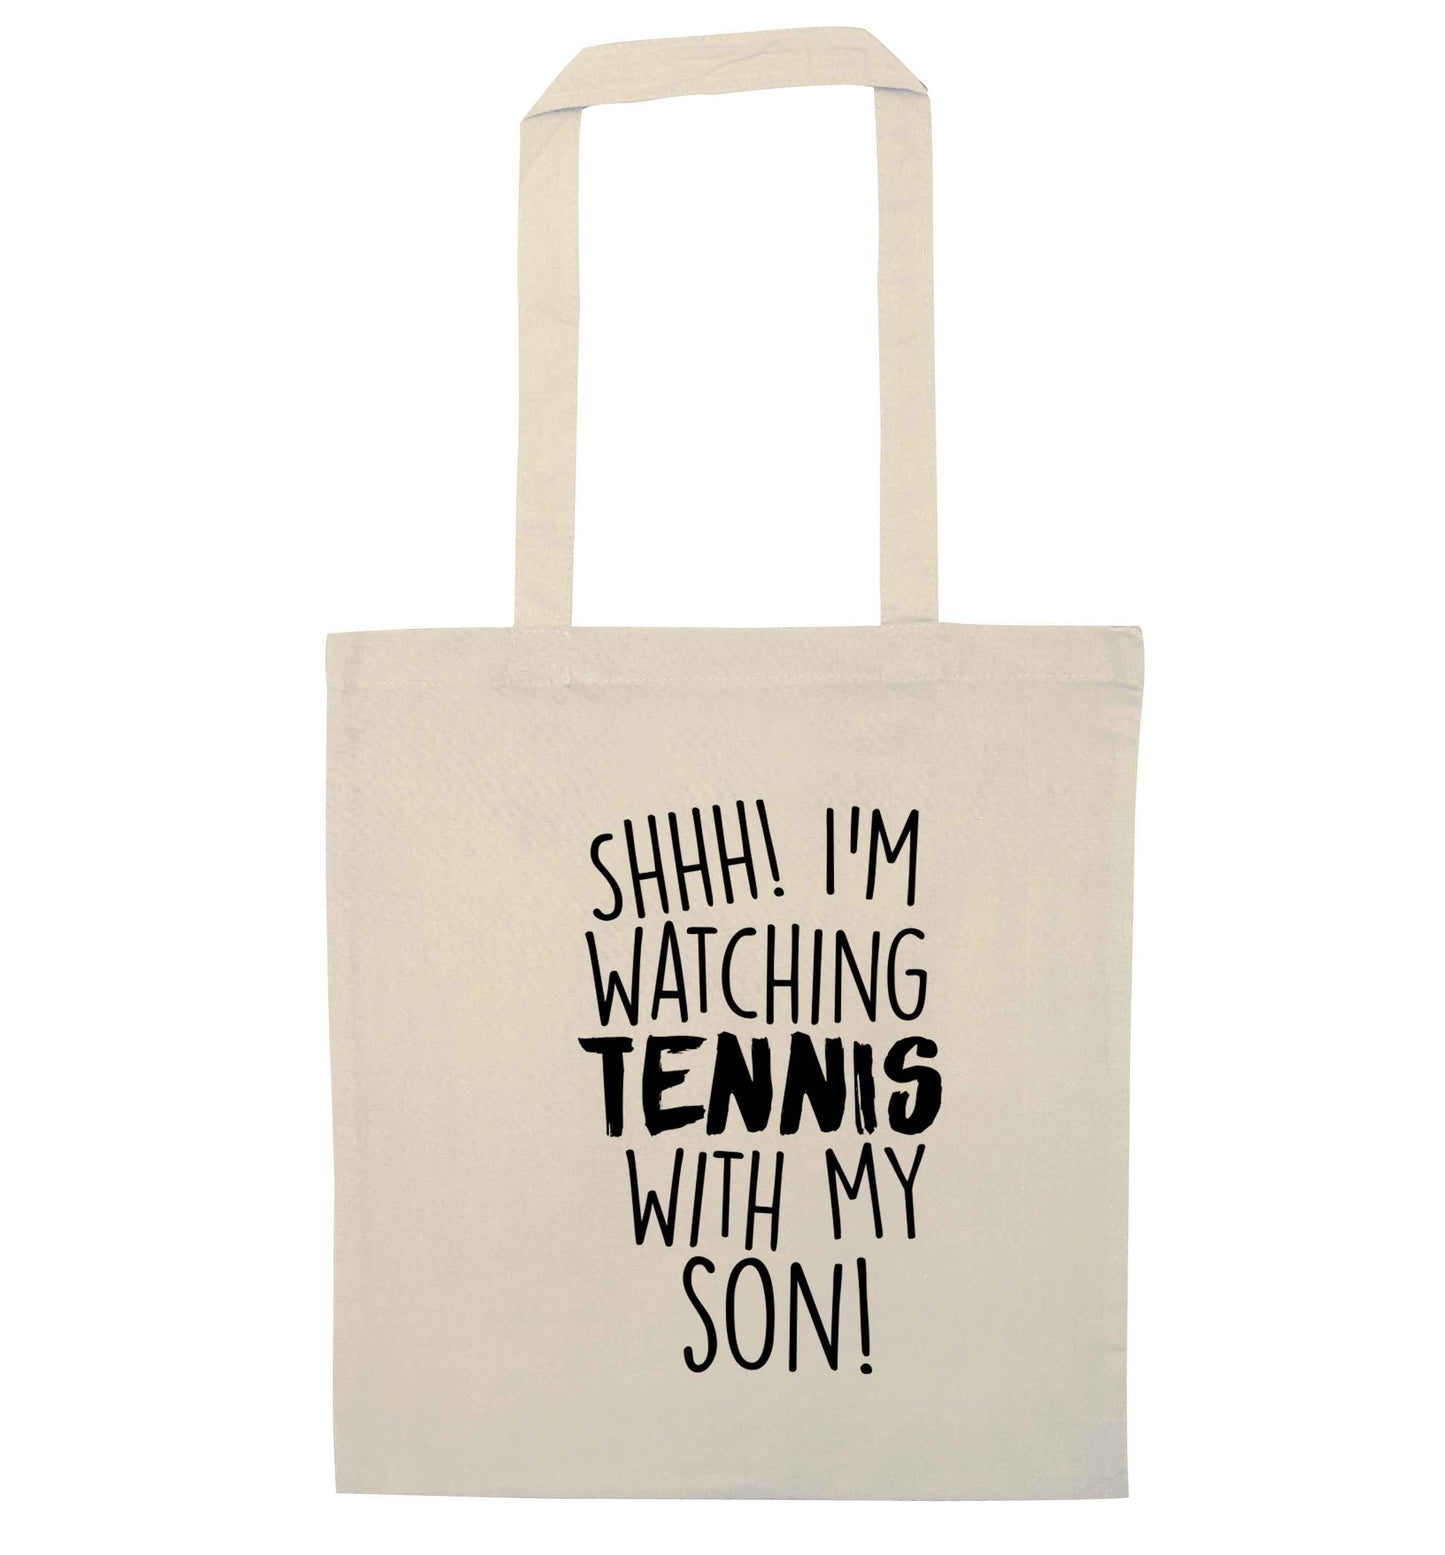 Shh! I'm watching tennis with my son! natural tote bag